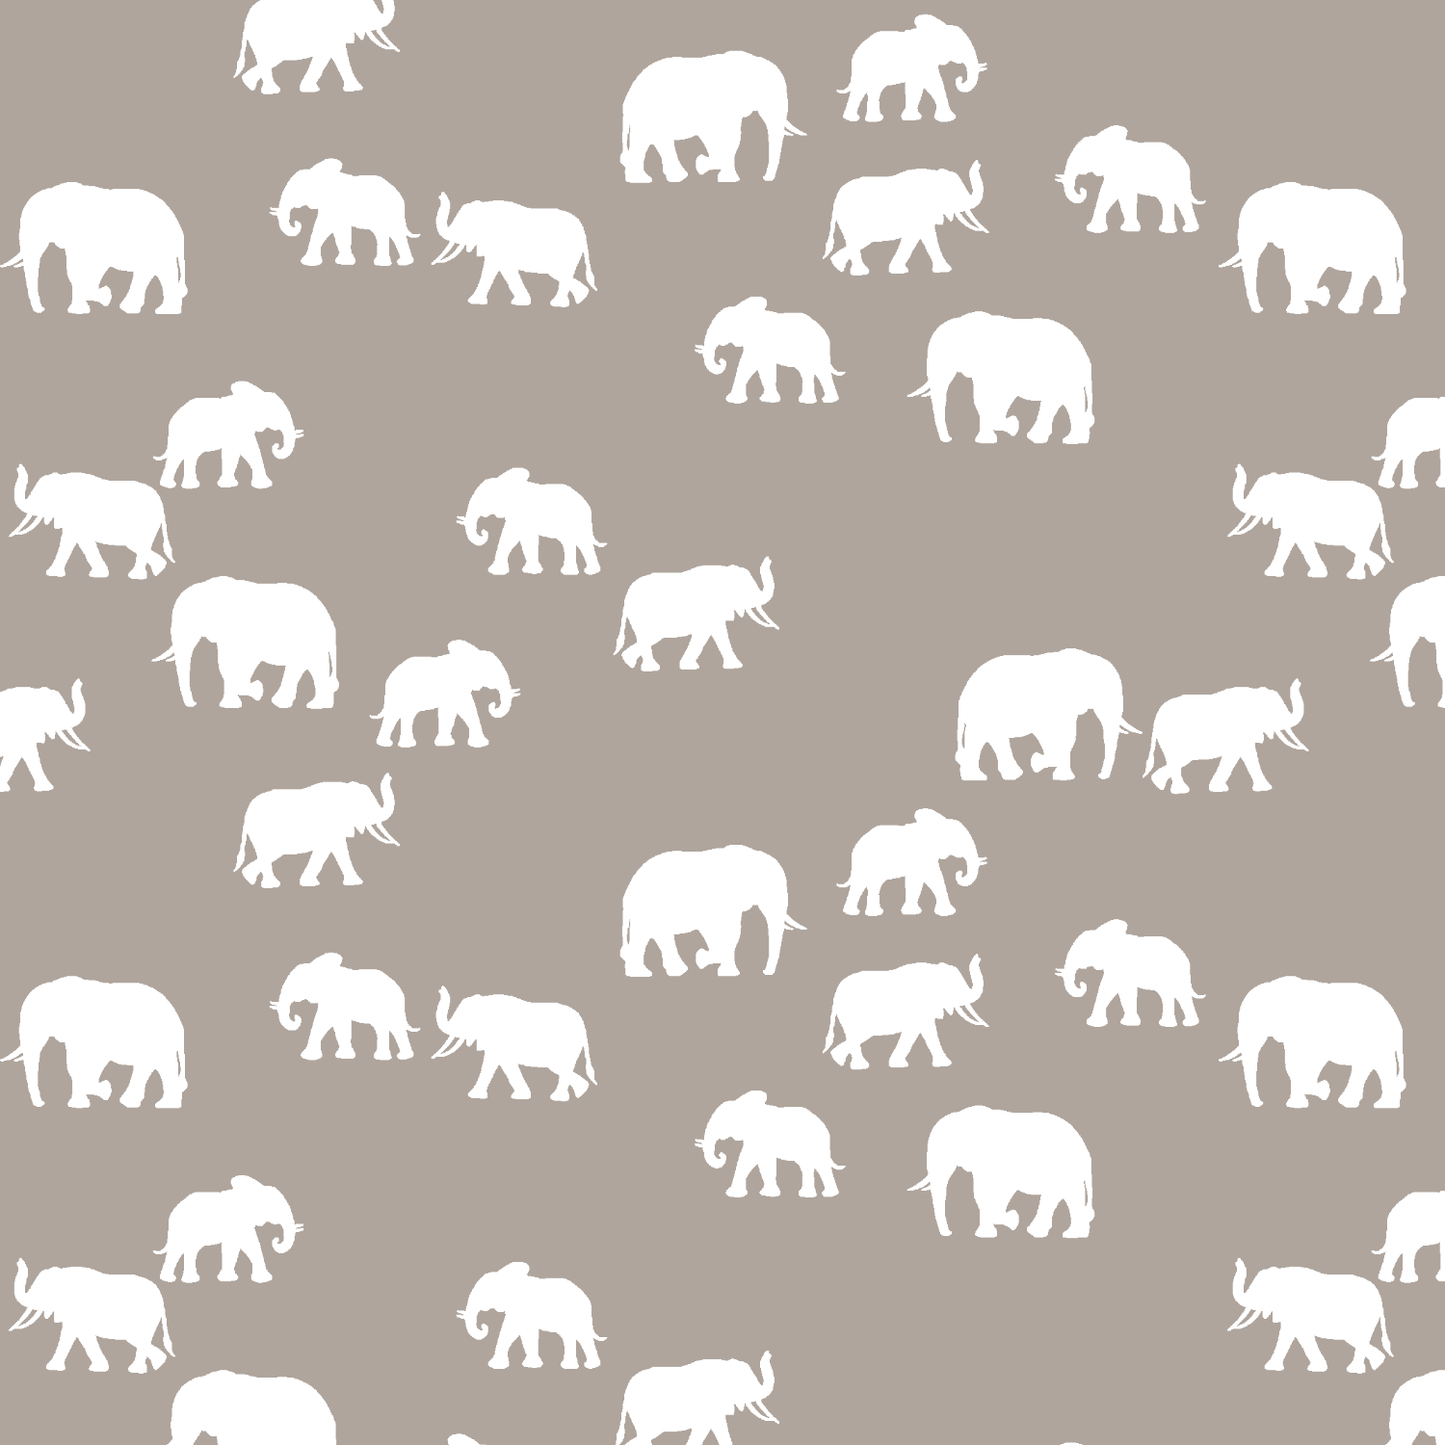 Elephant Silhouette in Taupe